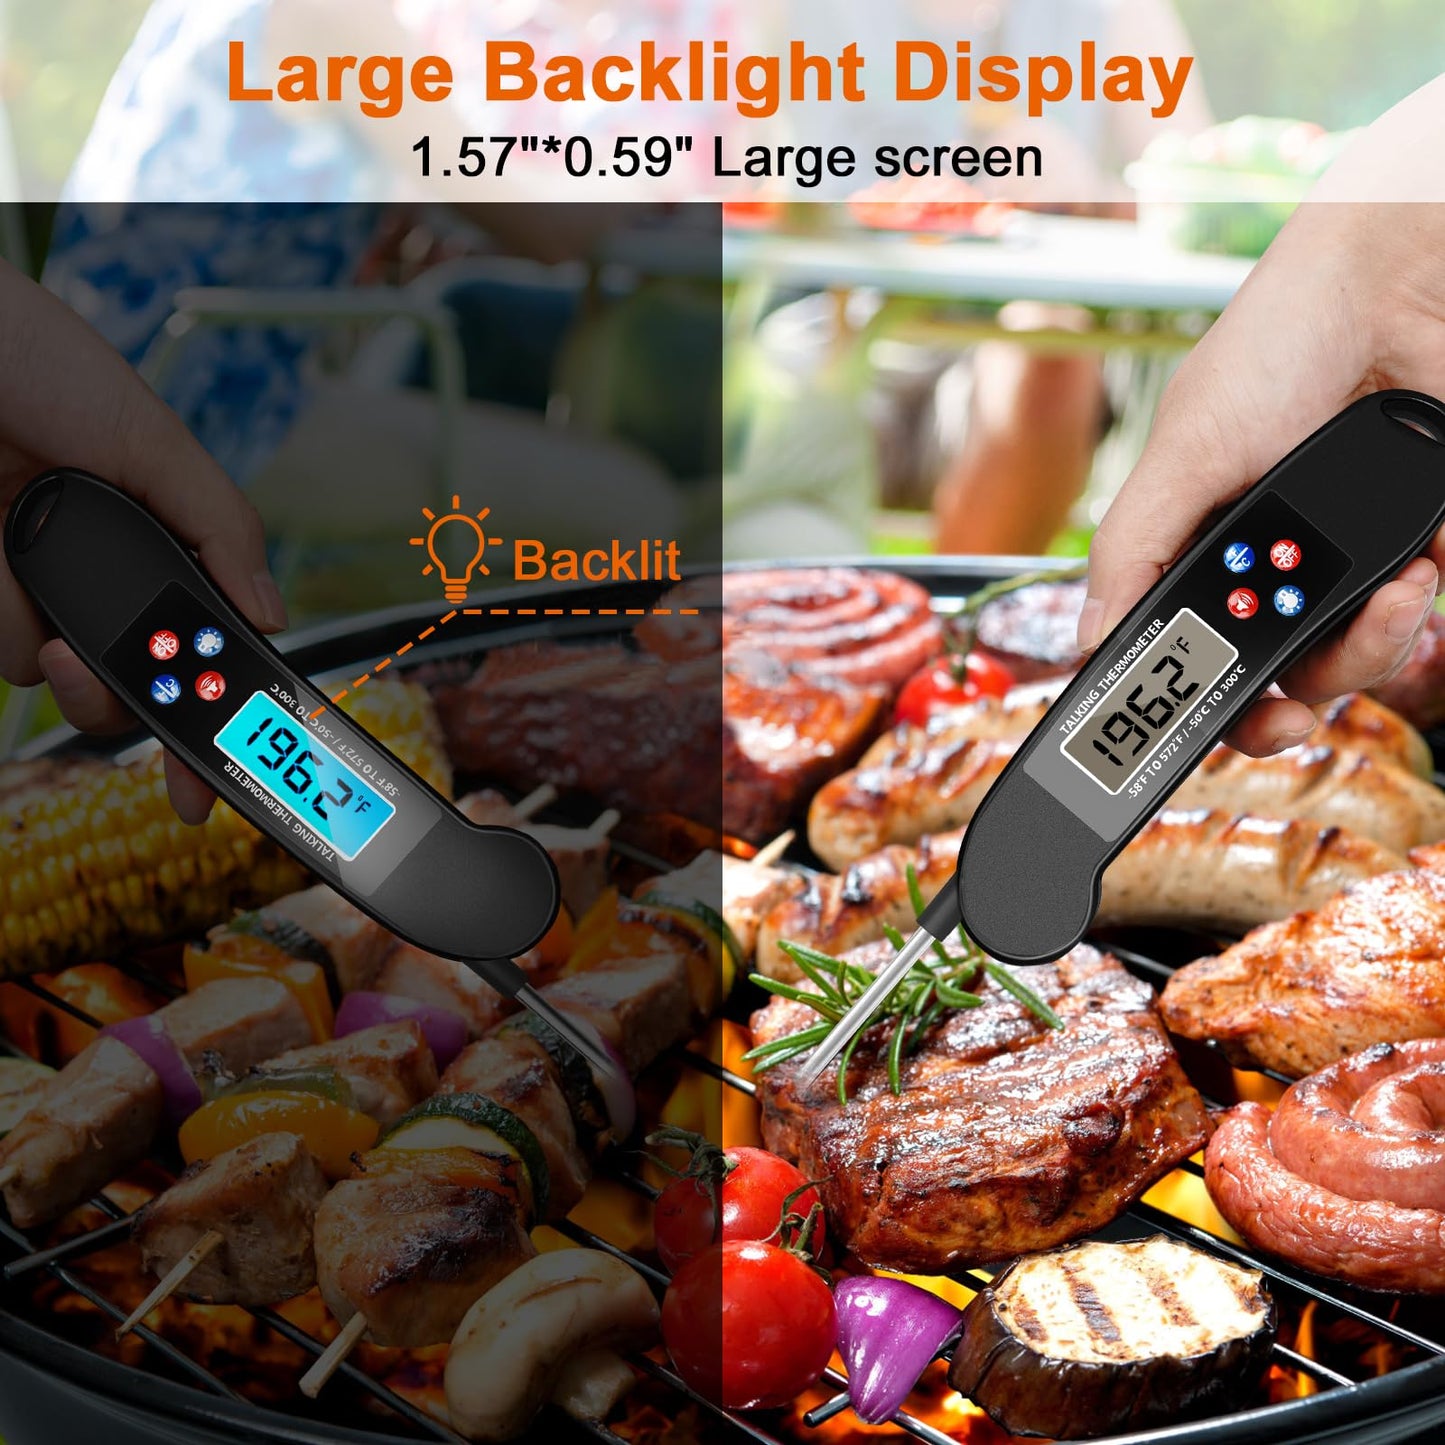 Awaiymi Digital Talking Thermometer for The Blind, Waterproof Instant Read Food Thermometer with Talking Function & Backlight, Meat Thermometer with Probe for Cooking and Grilling, and More